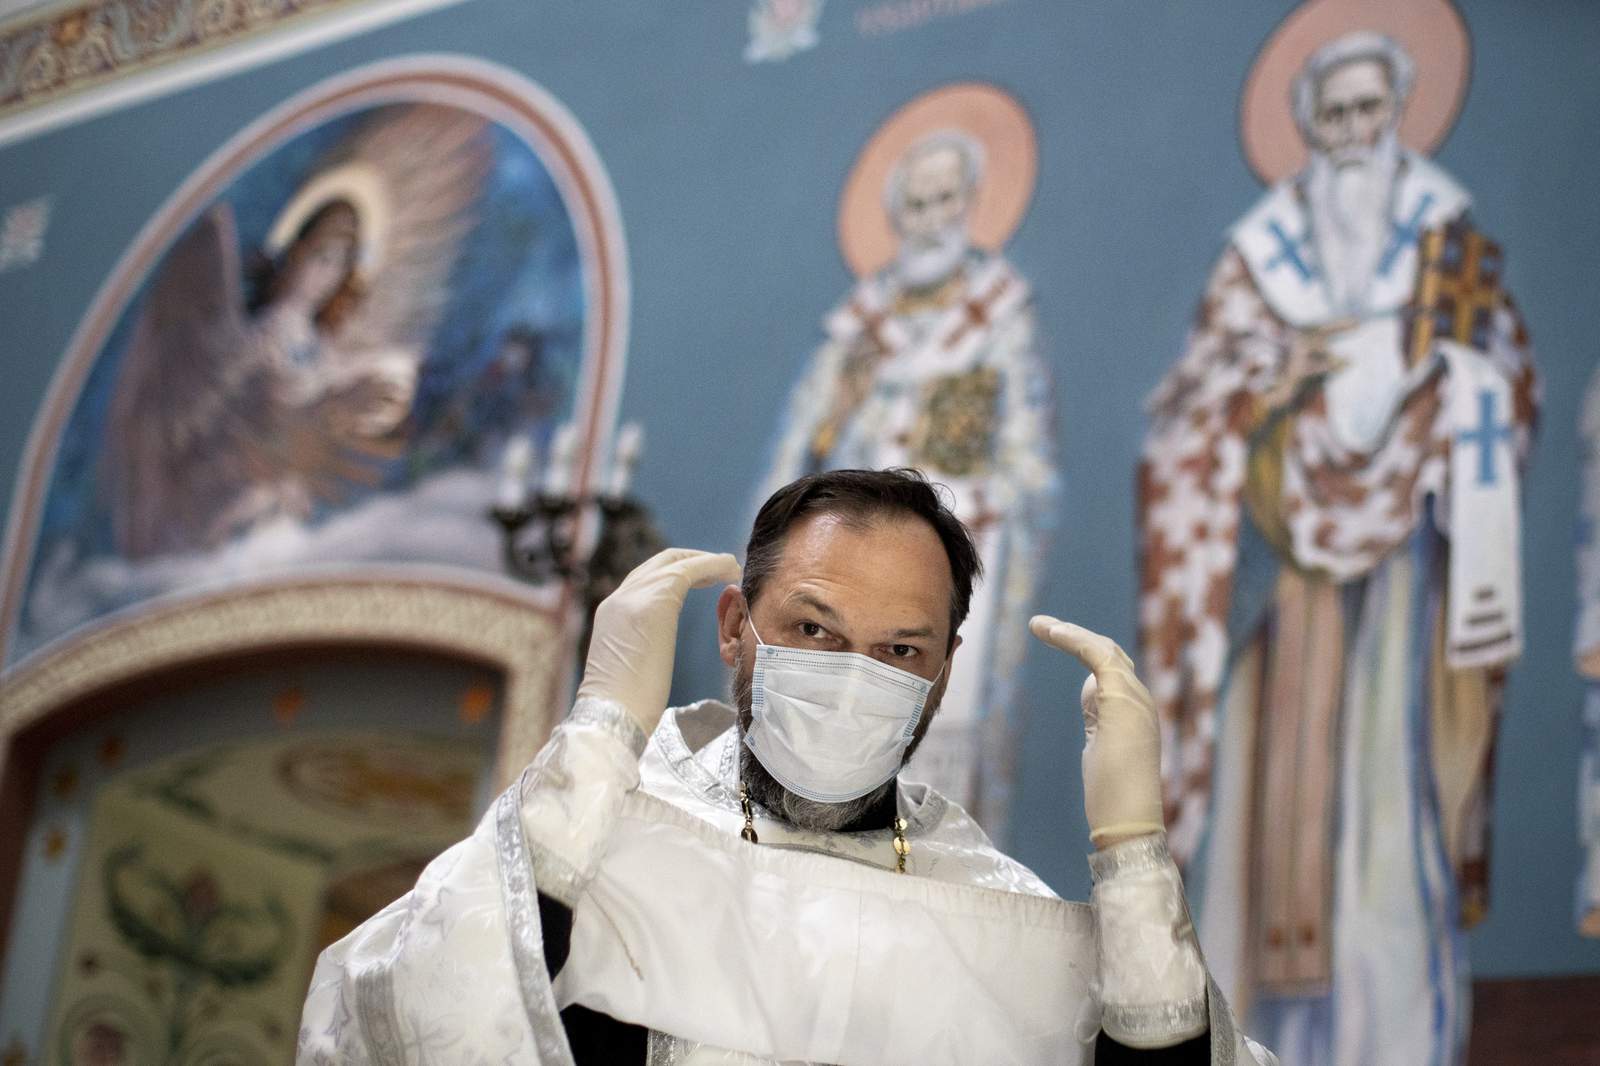 Russian Orthodox priest tends to Moscow's COVID-19 patients